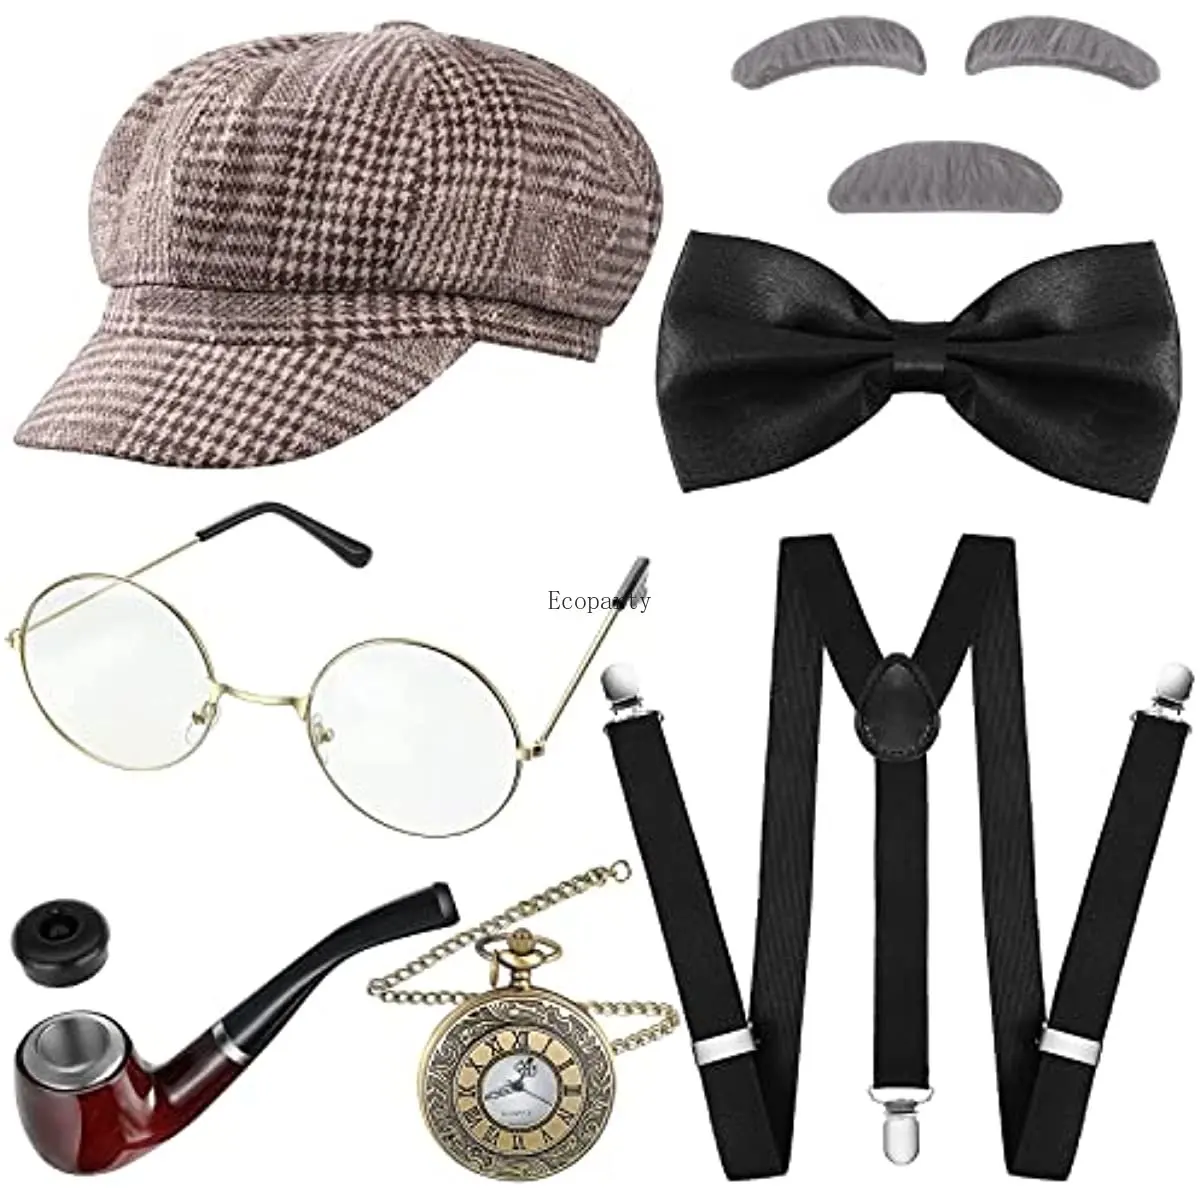 8 Pcs Old Man Costume 1920s Grandpa Accessories Set 100th Day of School Beret Hat Glasses Eyebrows Suspender Watch Great Gatsby